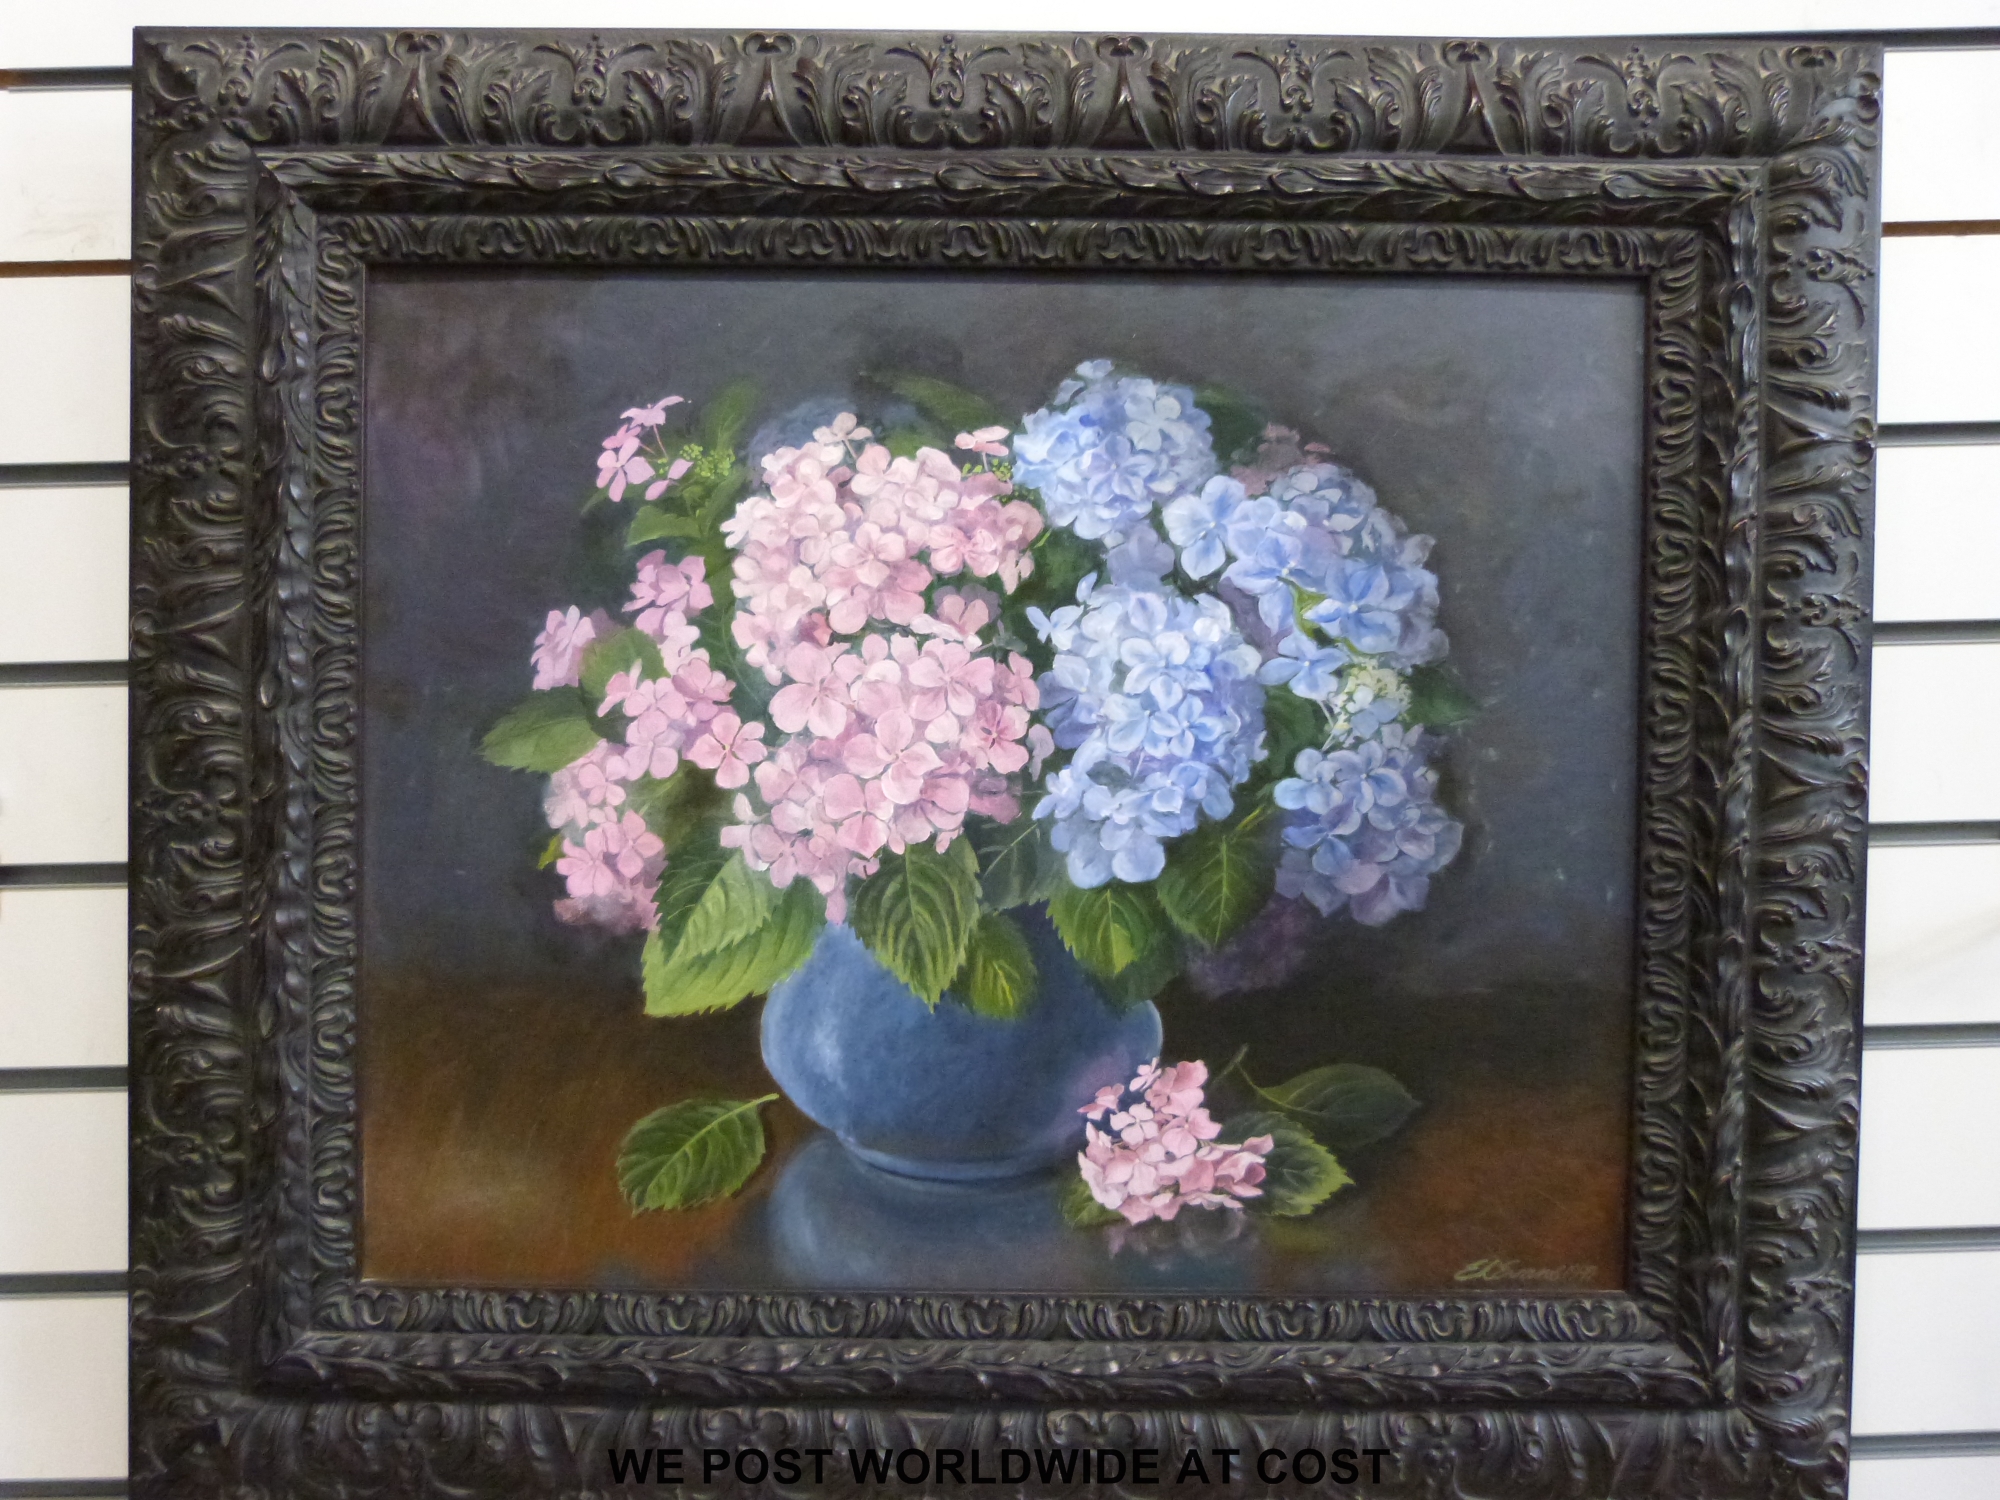 E L Evans oil on canvas still of hydrangeas in vase, signed and dated 1997 lower right, - Image 2 of 3